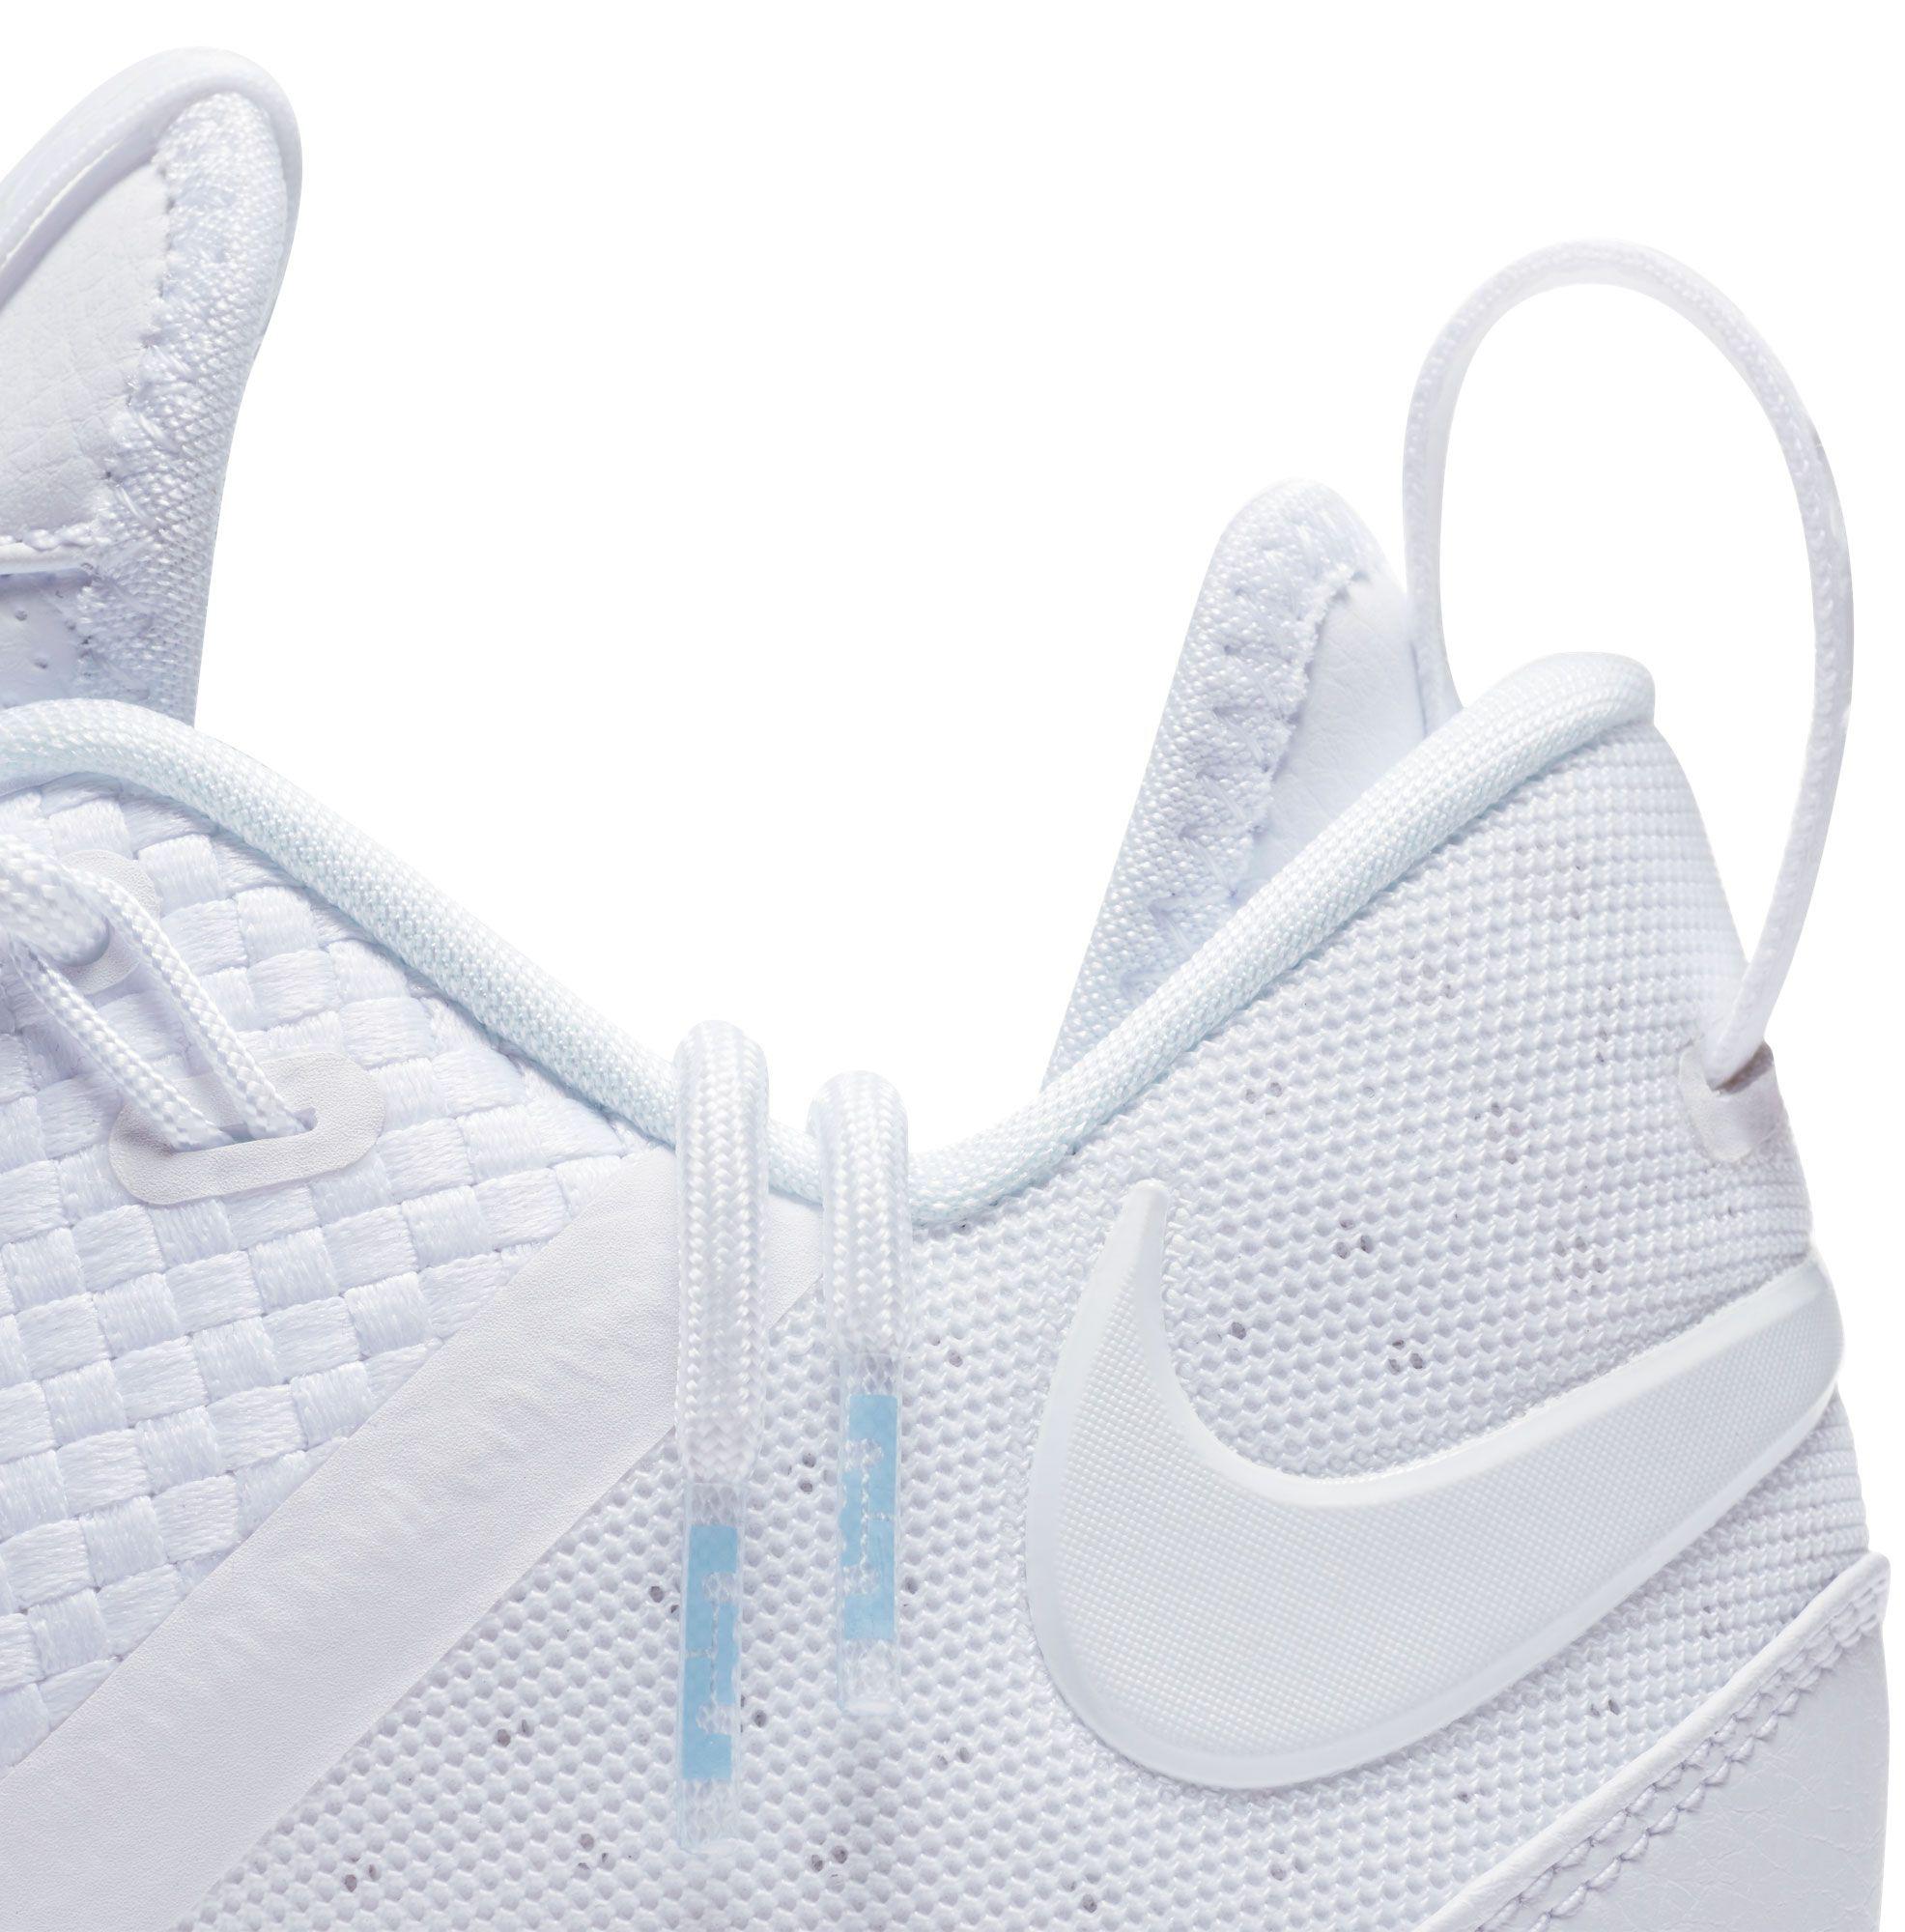 Nike Rubber Lebron 14 Low Basketball Shoes in White/White (White) for ...